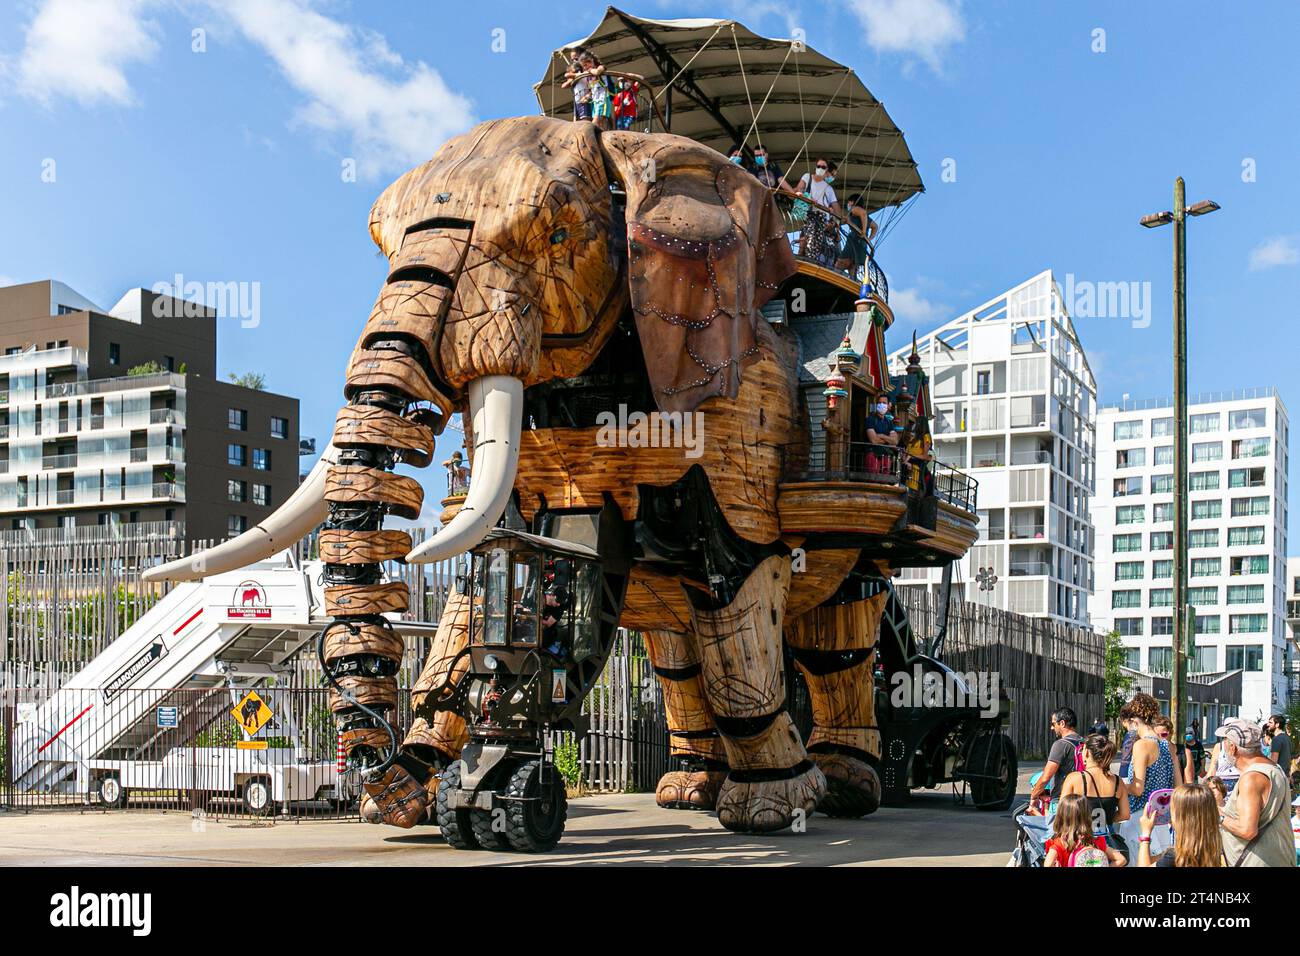 Mechanical elephant of Machines of the Isle attraction in Nantes, France Stock Photo